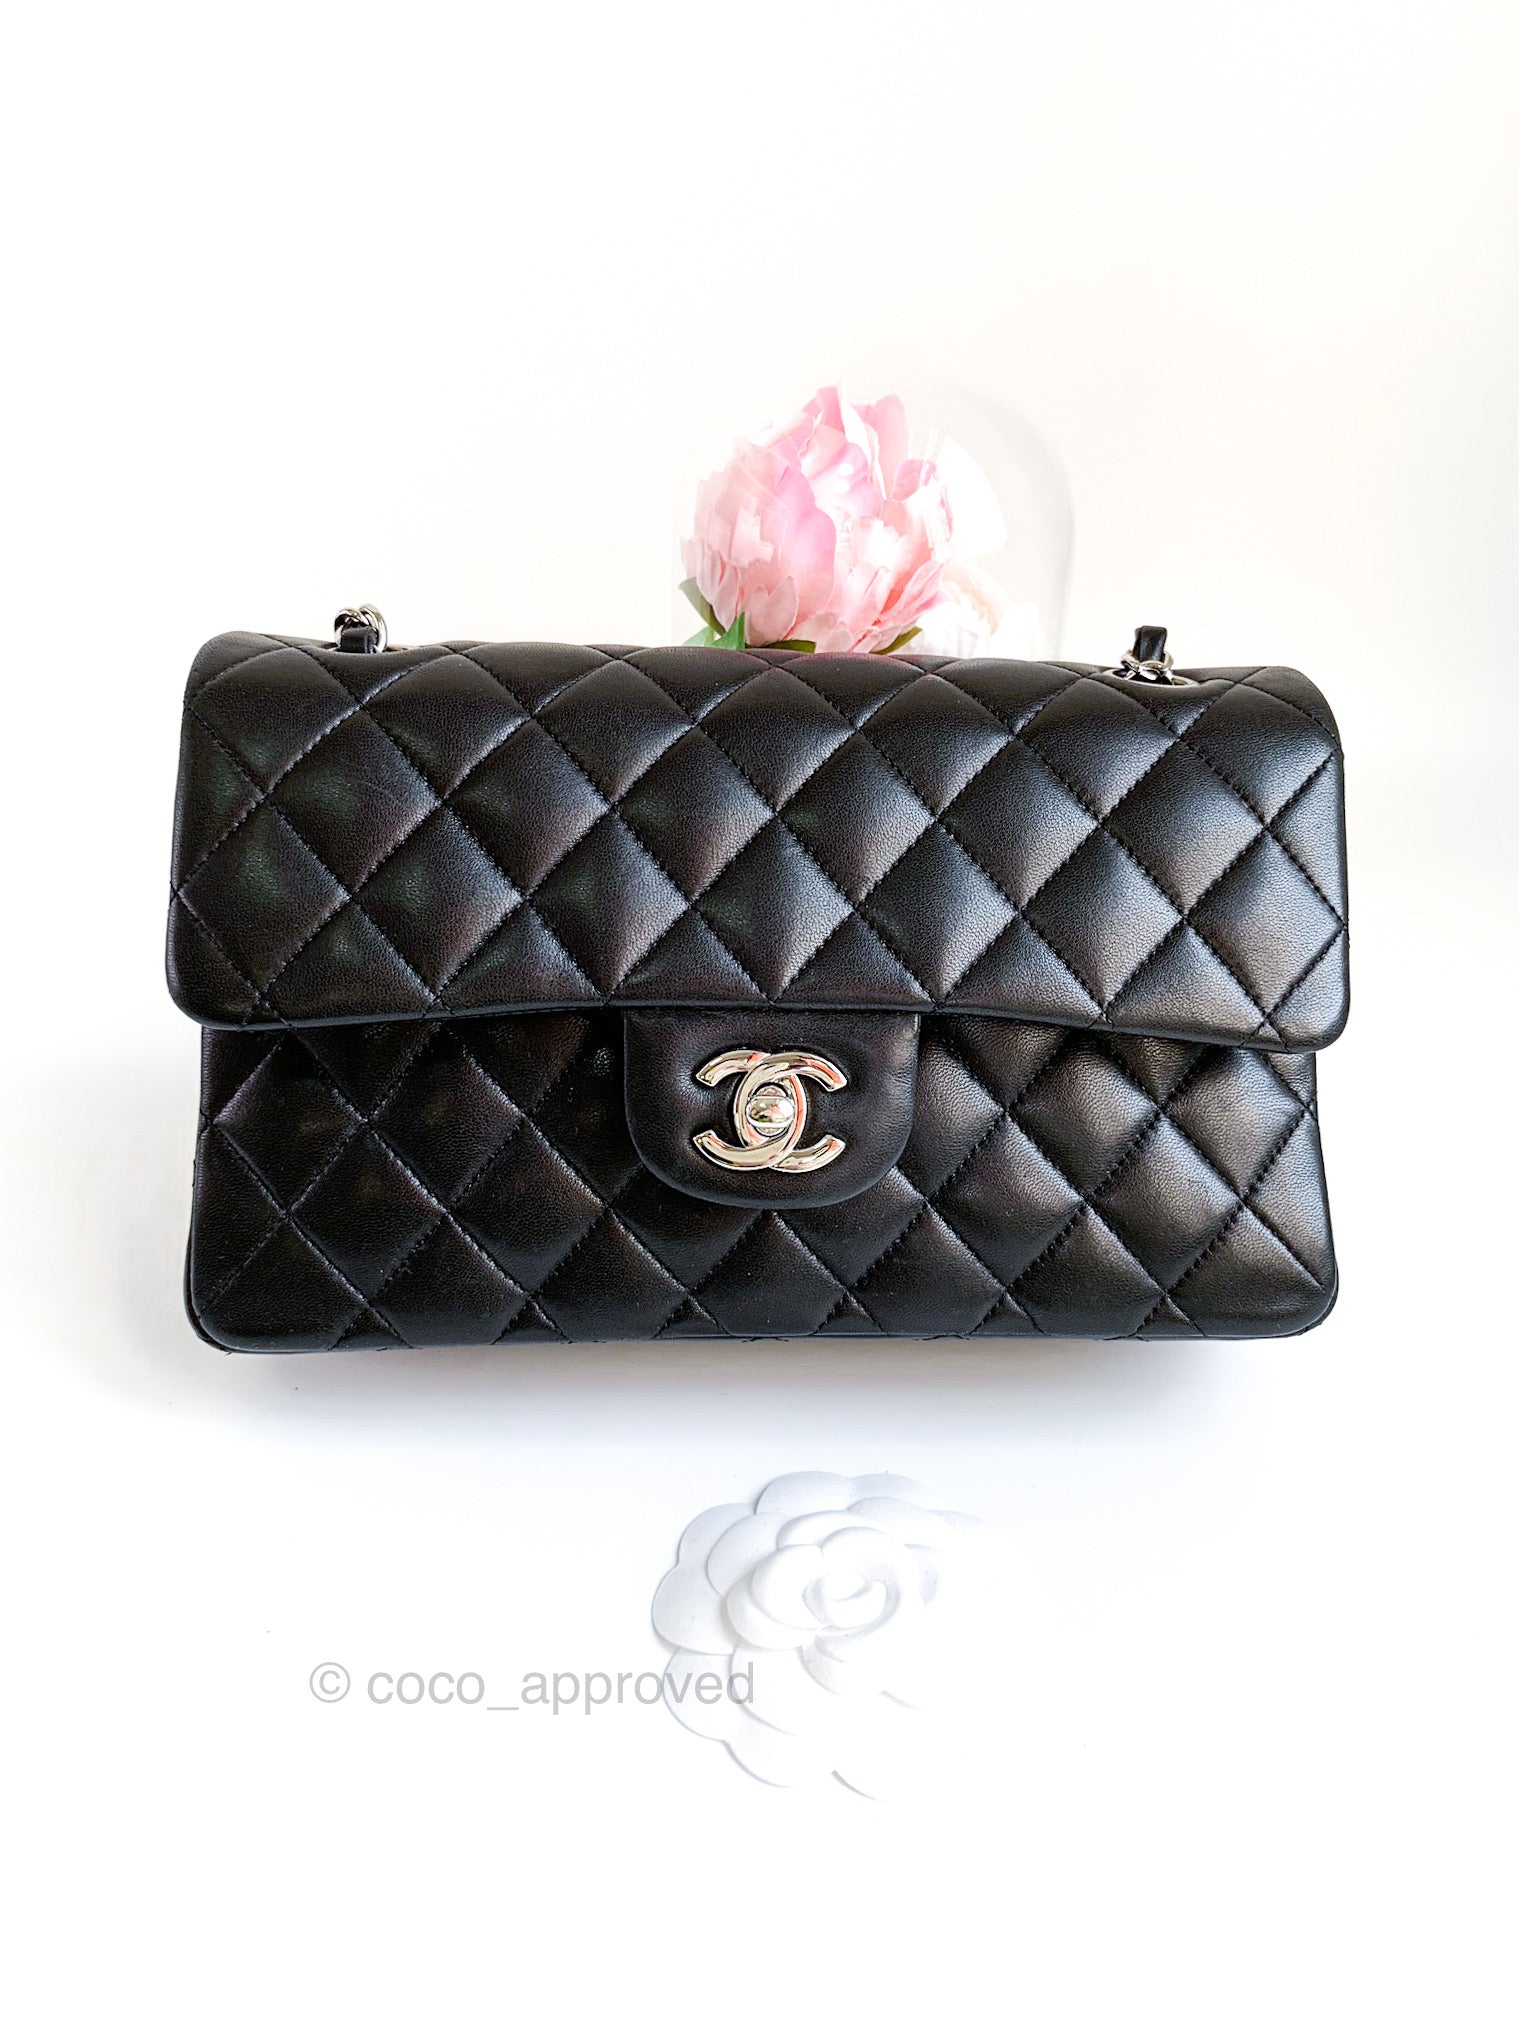 Chanel Small Classic Double Flap Bag Black Lambskin Rose Gold Hardware